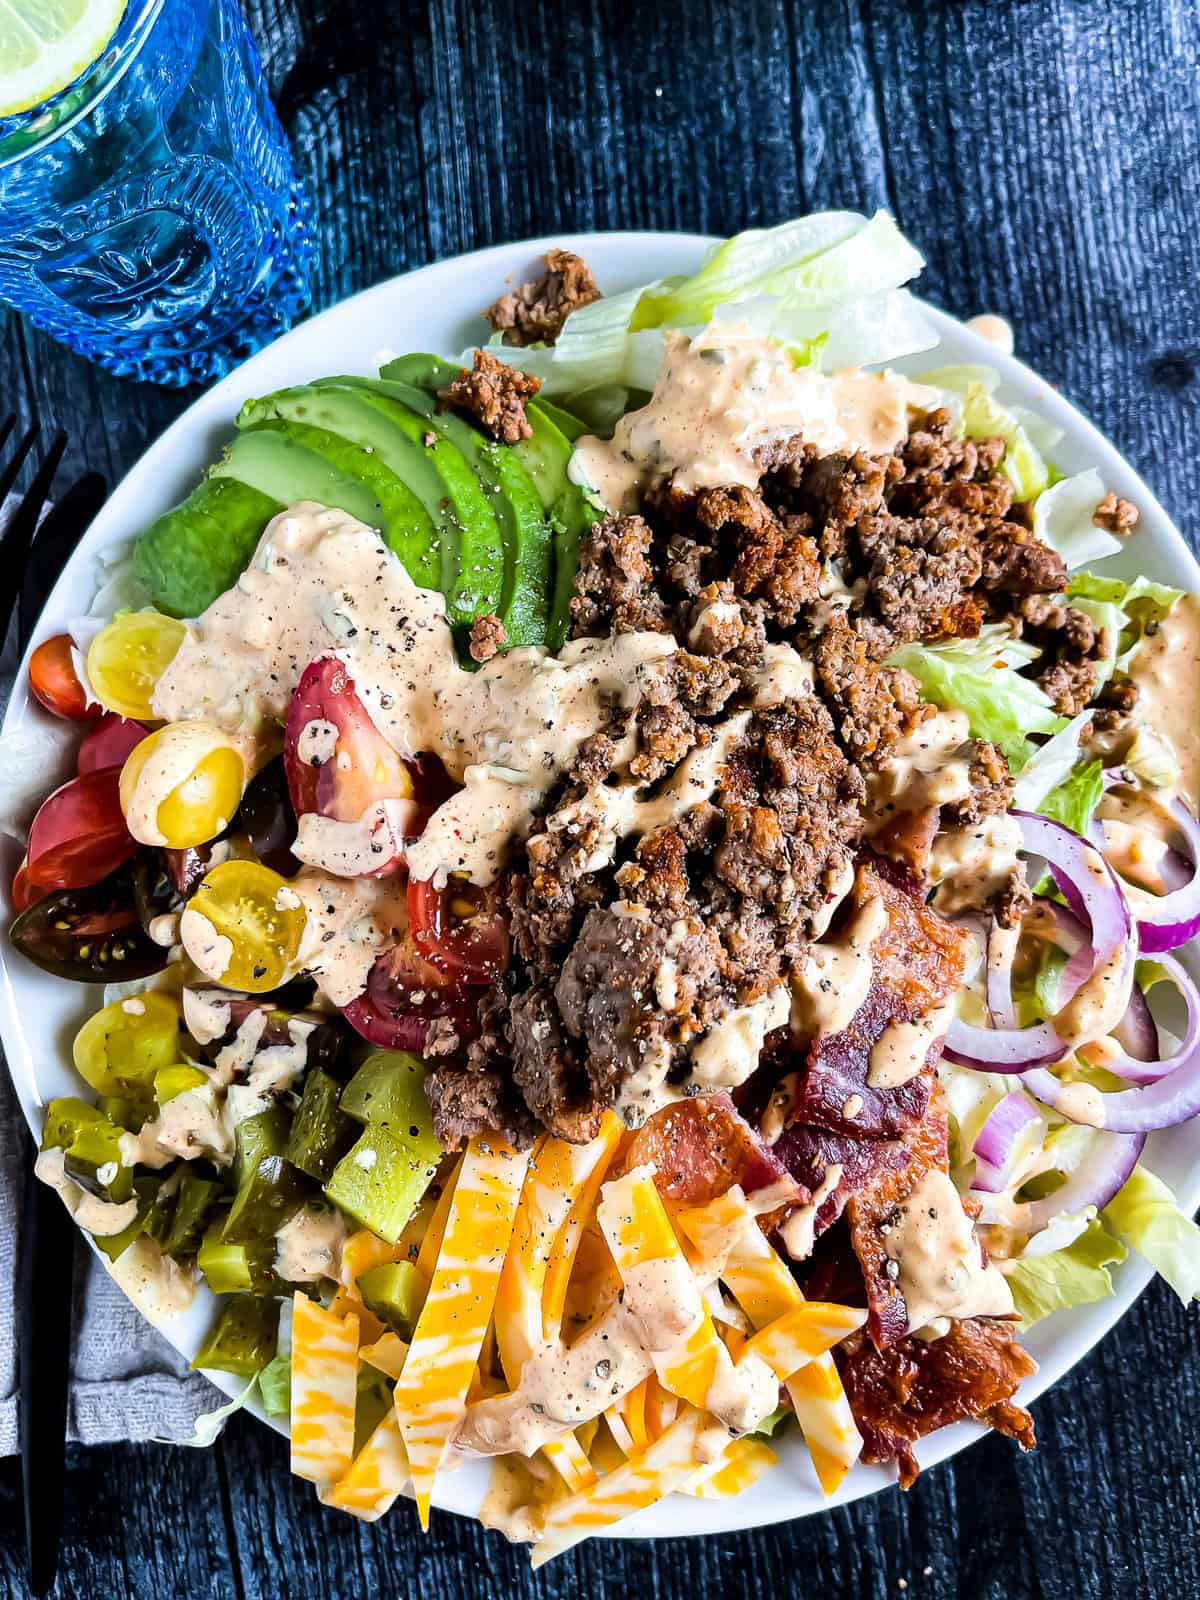 Bacon cheeseburger bowl with all the fixings and burger sauce